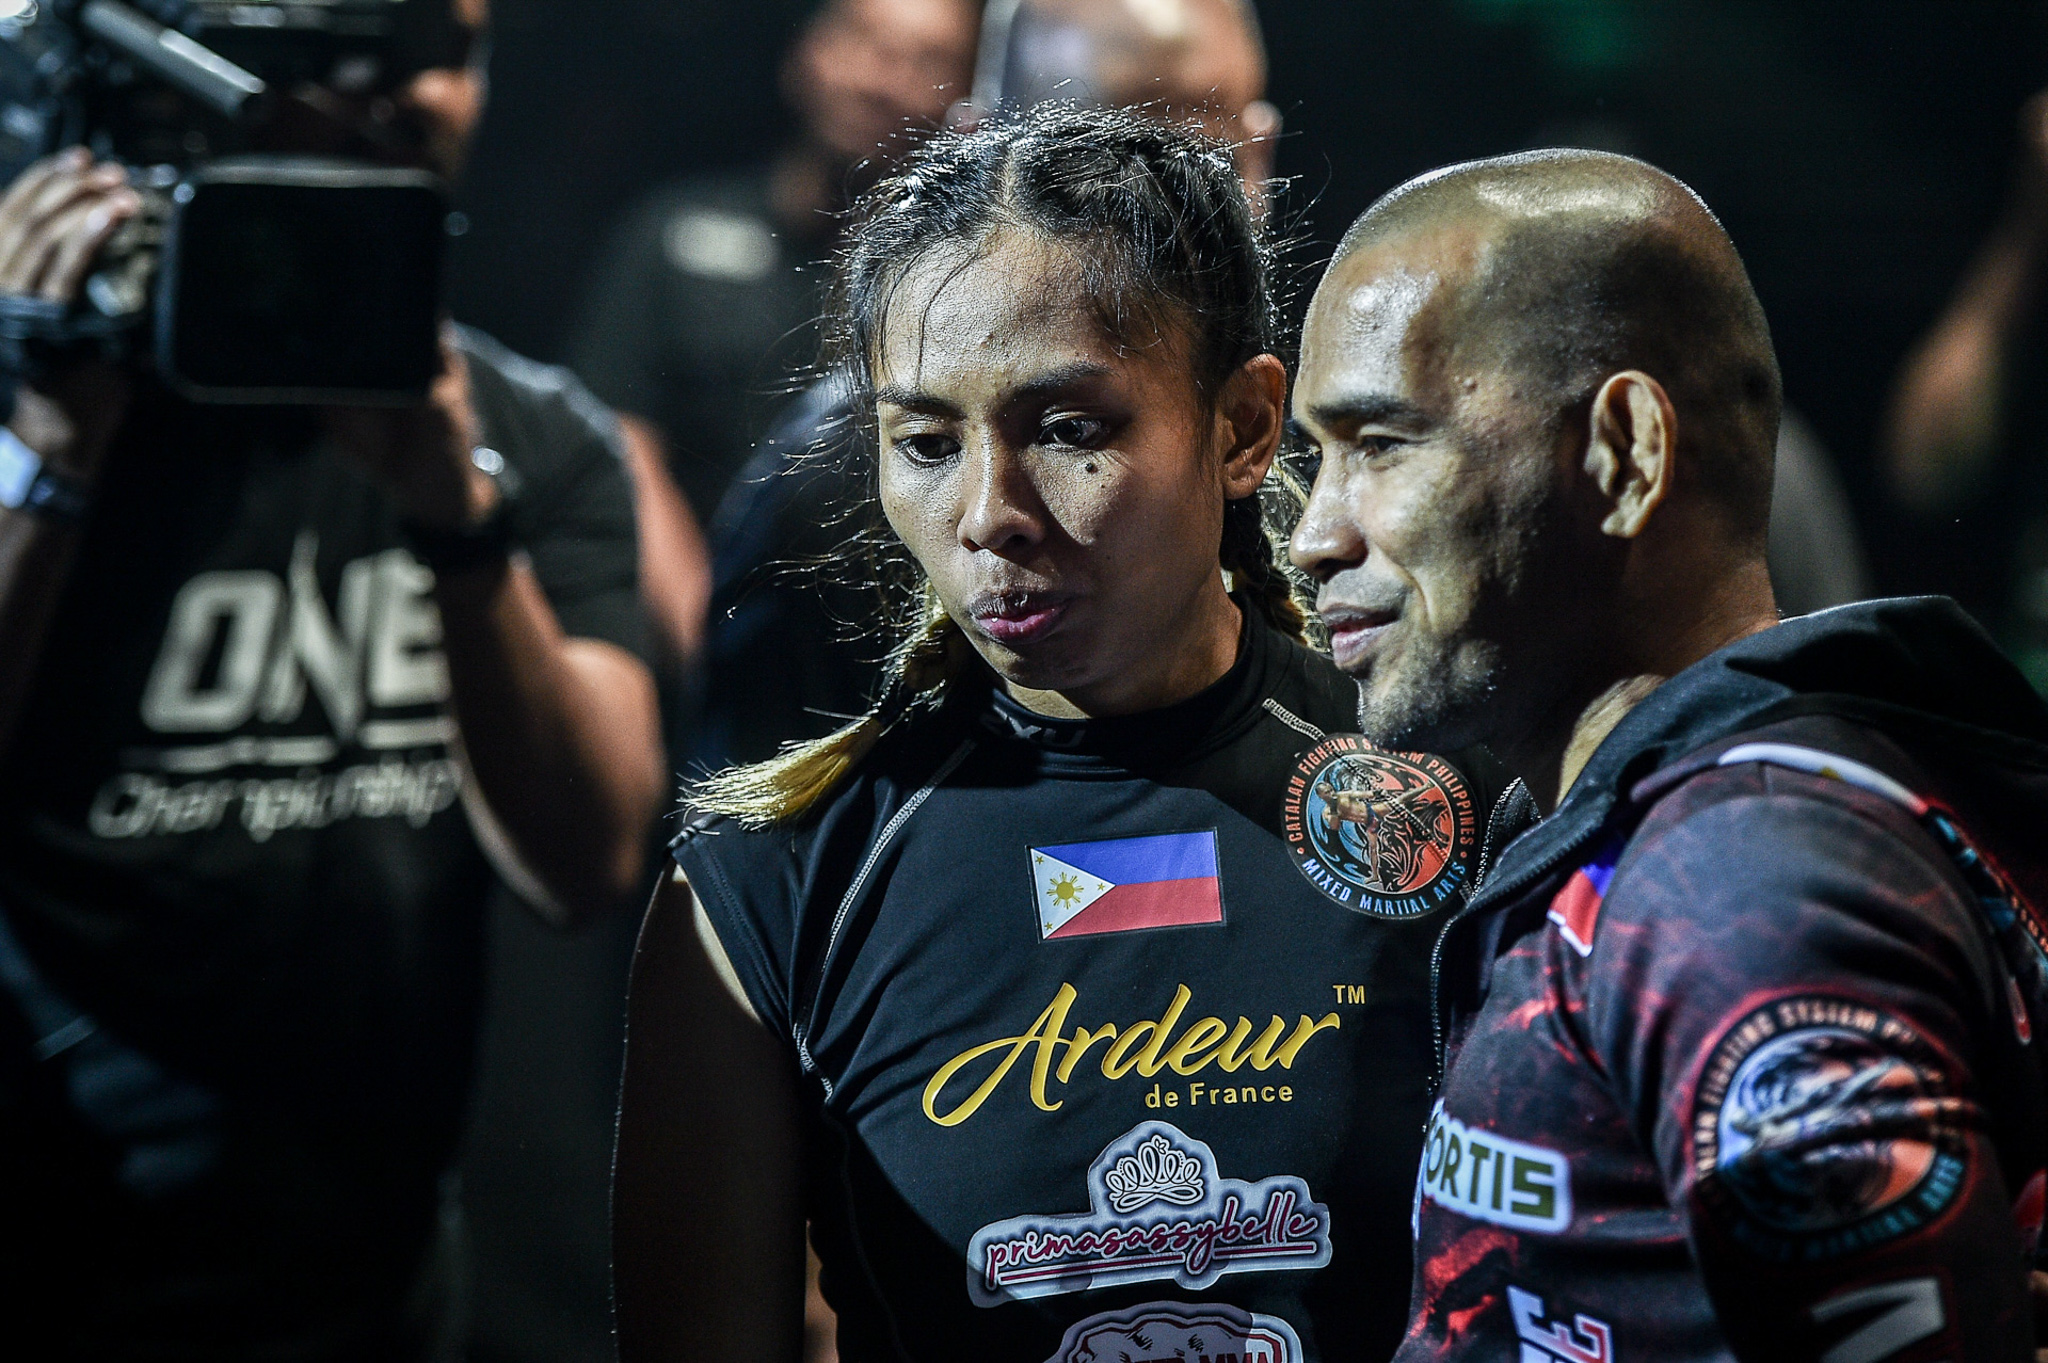 Jomary Torres determined to end slump, eyes KO victory